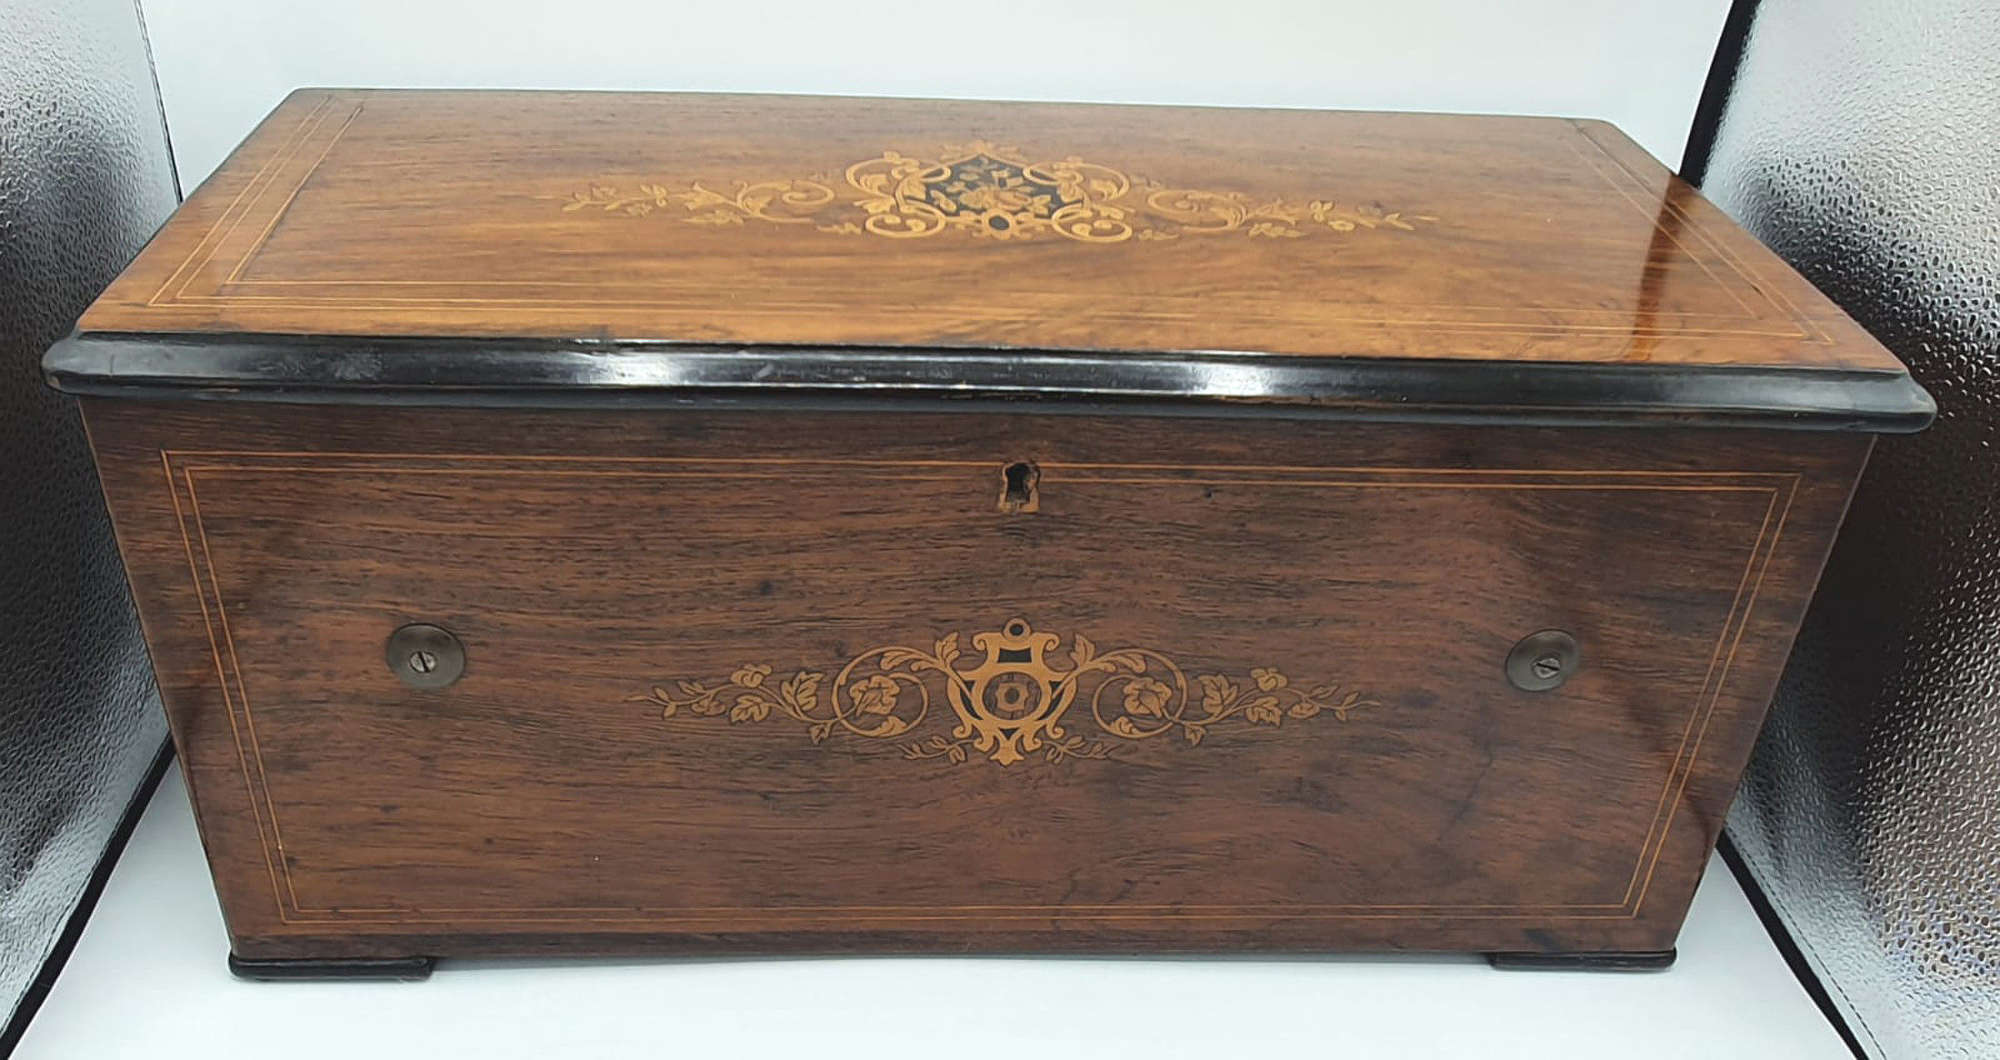 Rare 19th Century Marquetry Inlaid Rosewood Cylinder Music Box